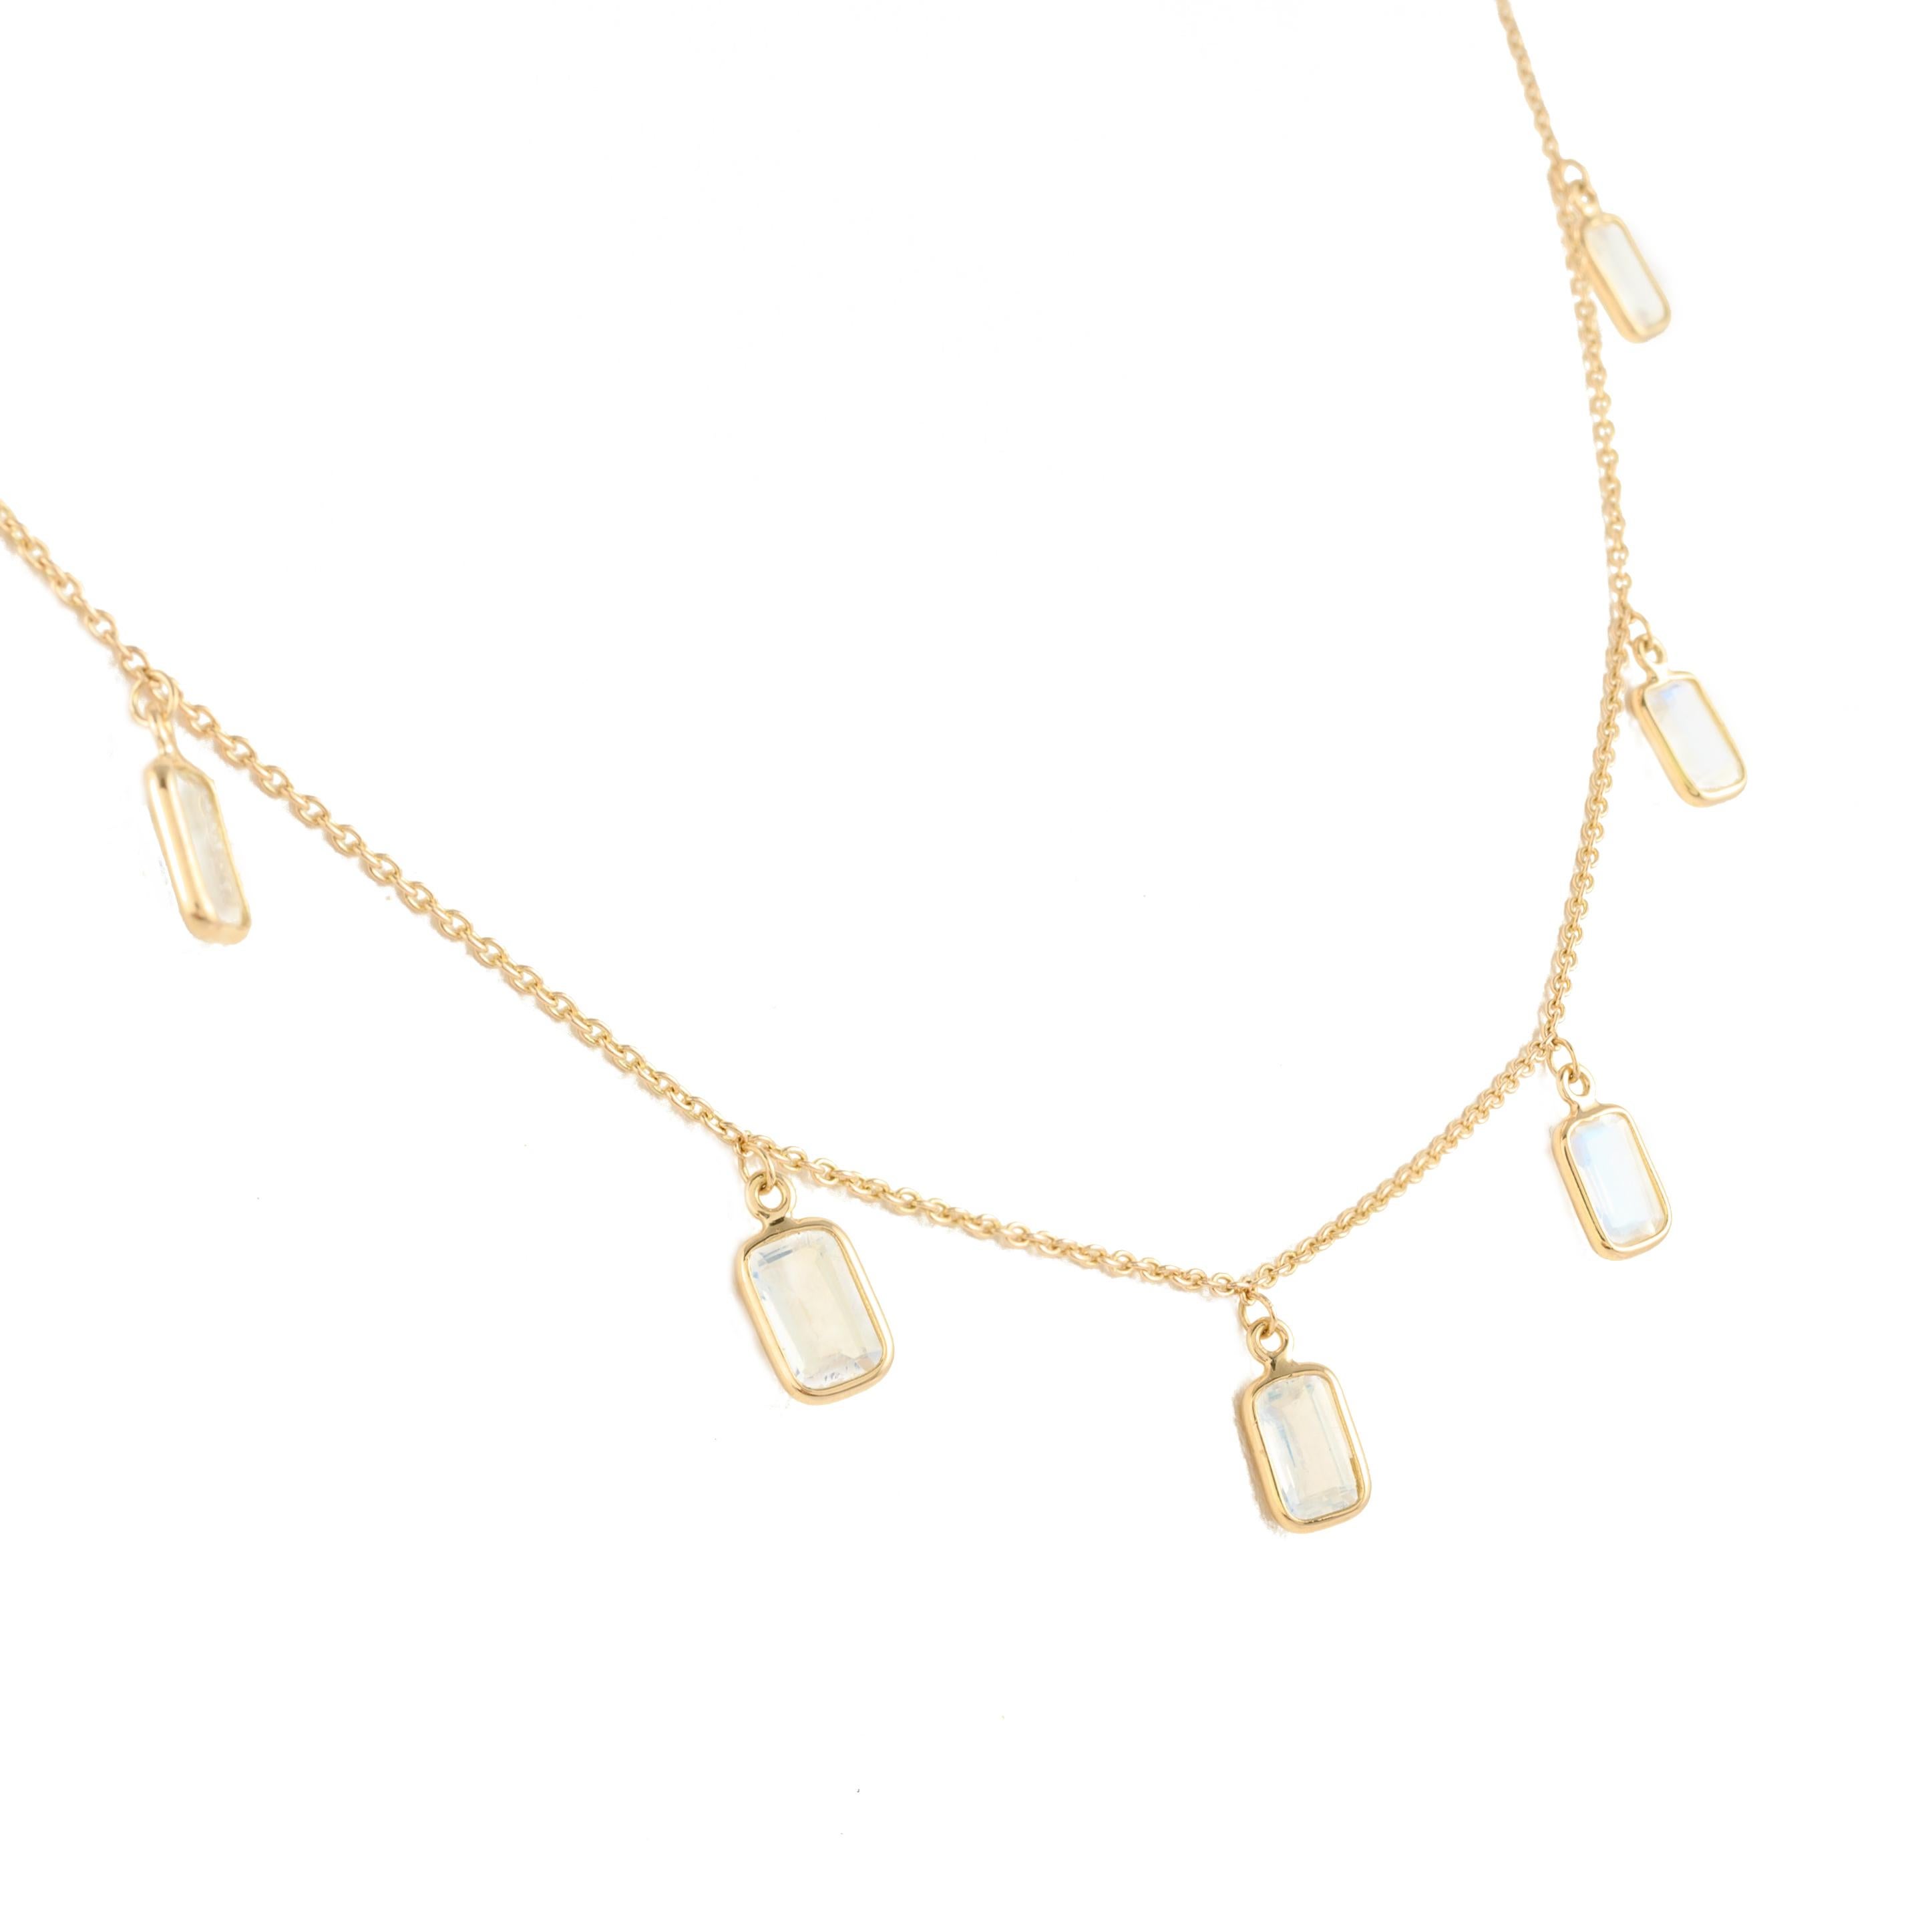 Baguette Cut Rainbow Moonstone Chain Necklace Gift for Girlfriend in 18k Solid Yellow Gold For Sale